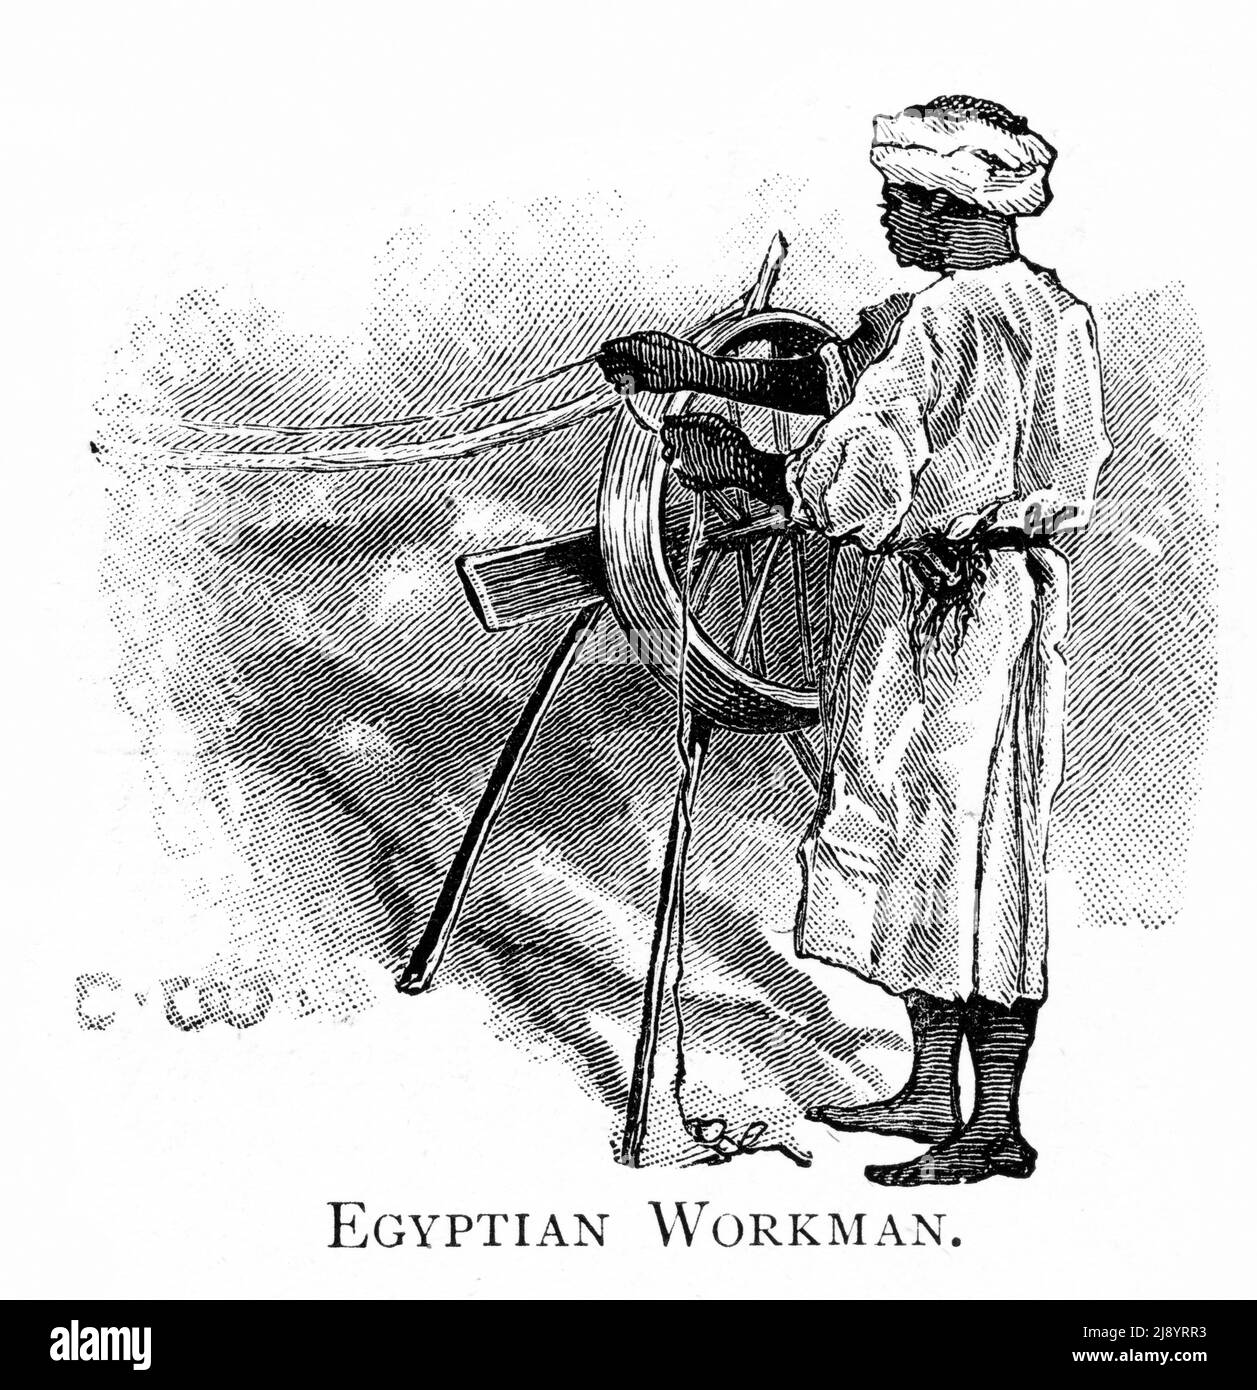 Engraving of a man making cloth in Egypt, from a publication circa 1880 Stock Photo